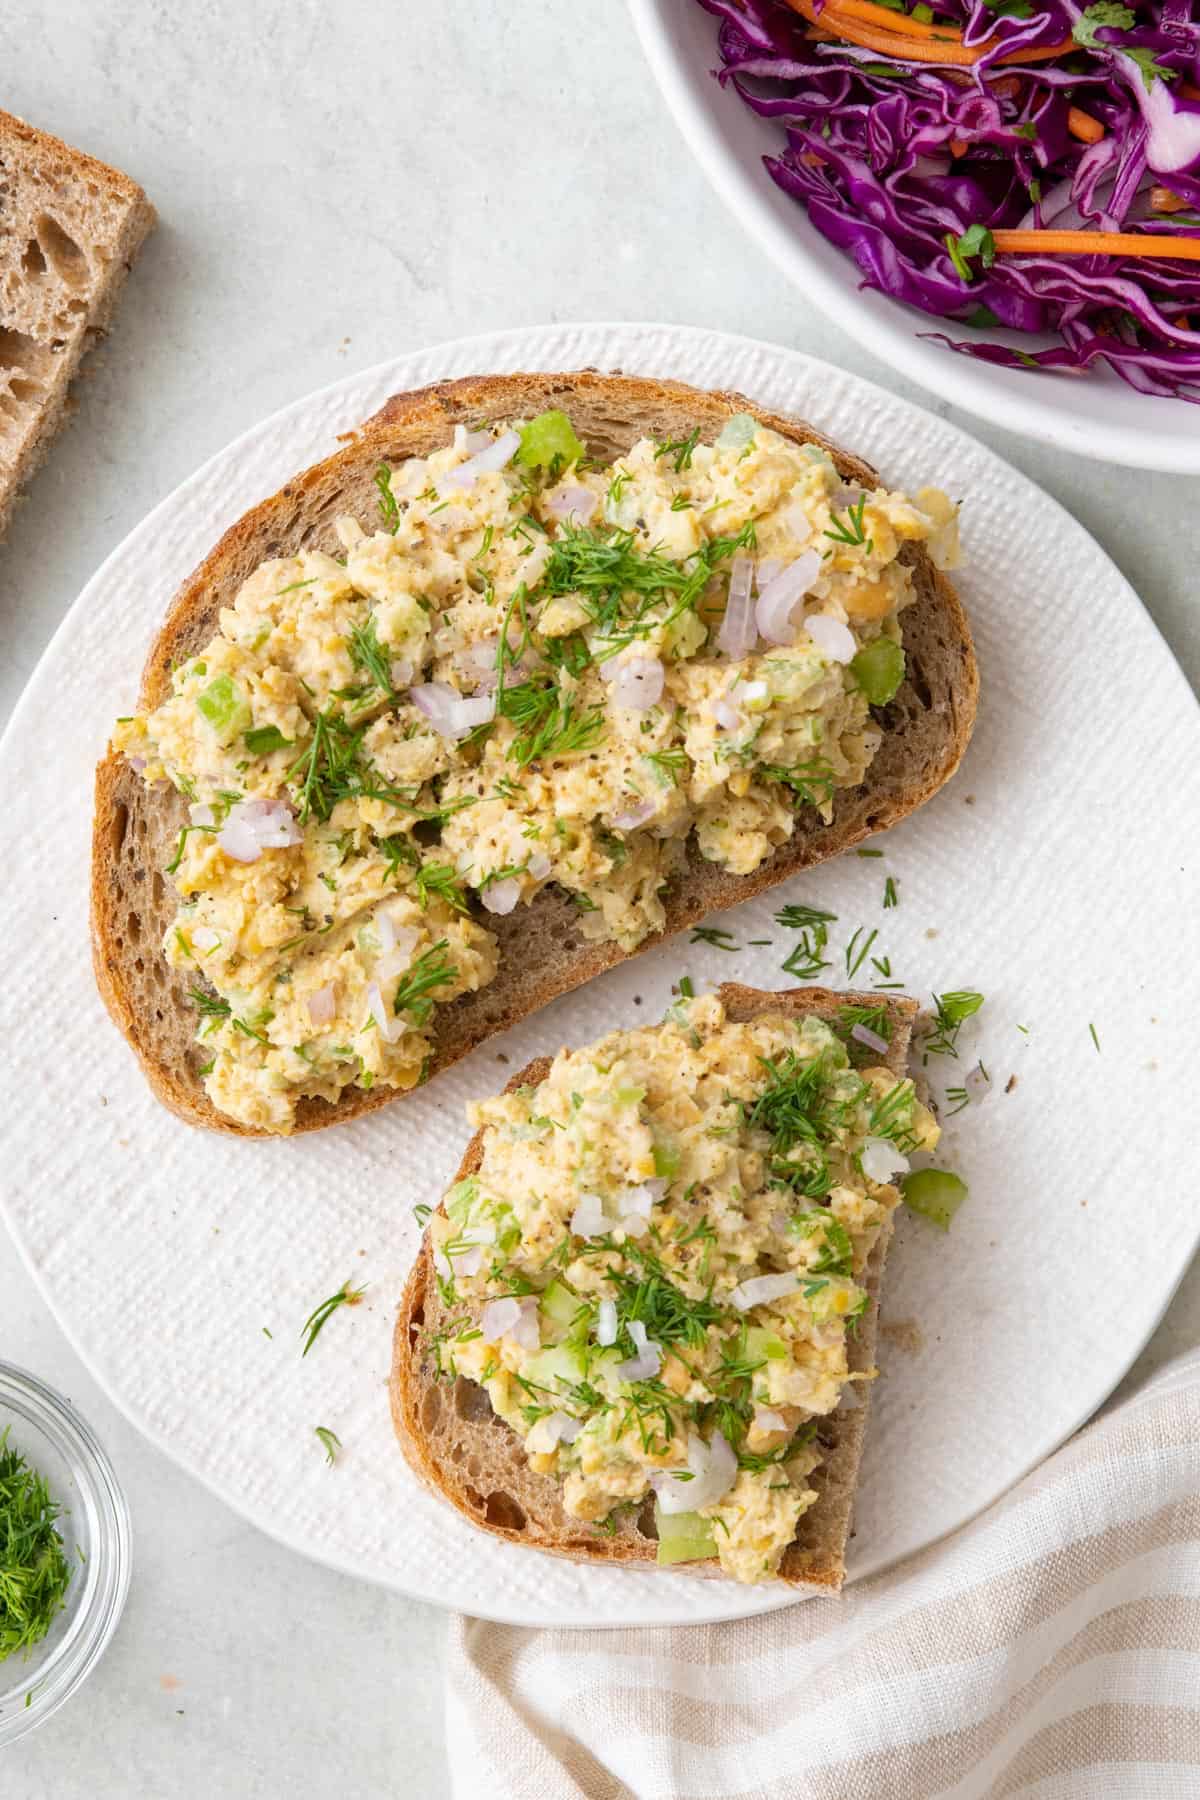 chick-pea "tuna" Salad on a slice and a half of savory bread garnished with dill, with a bowl of russet salad nearby.